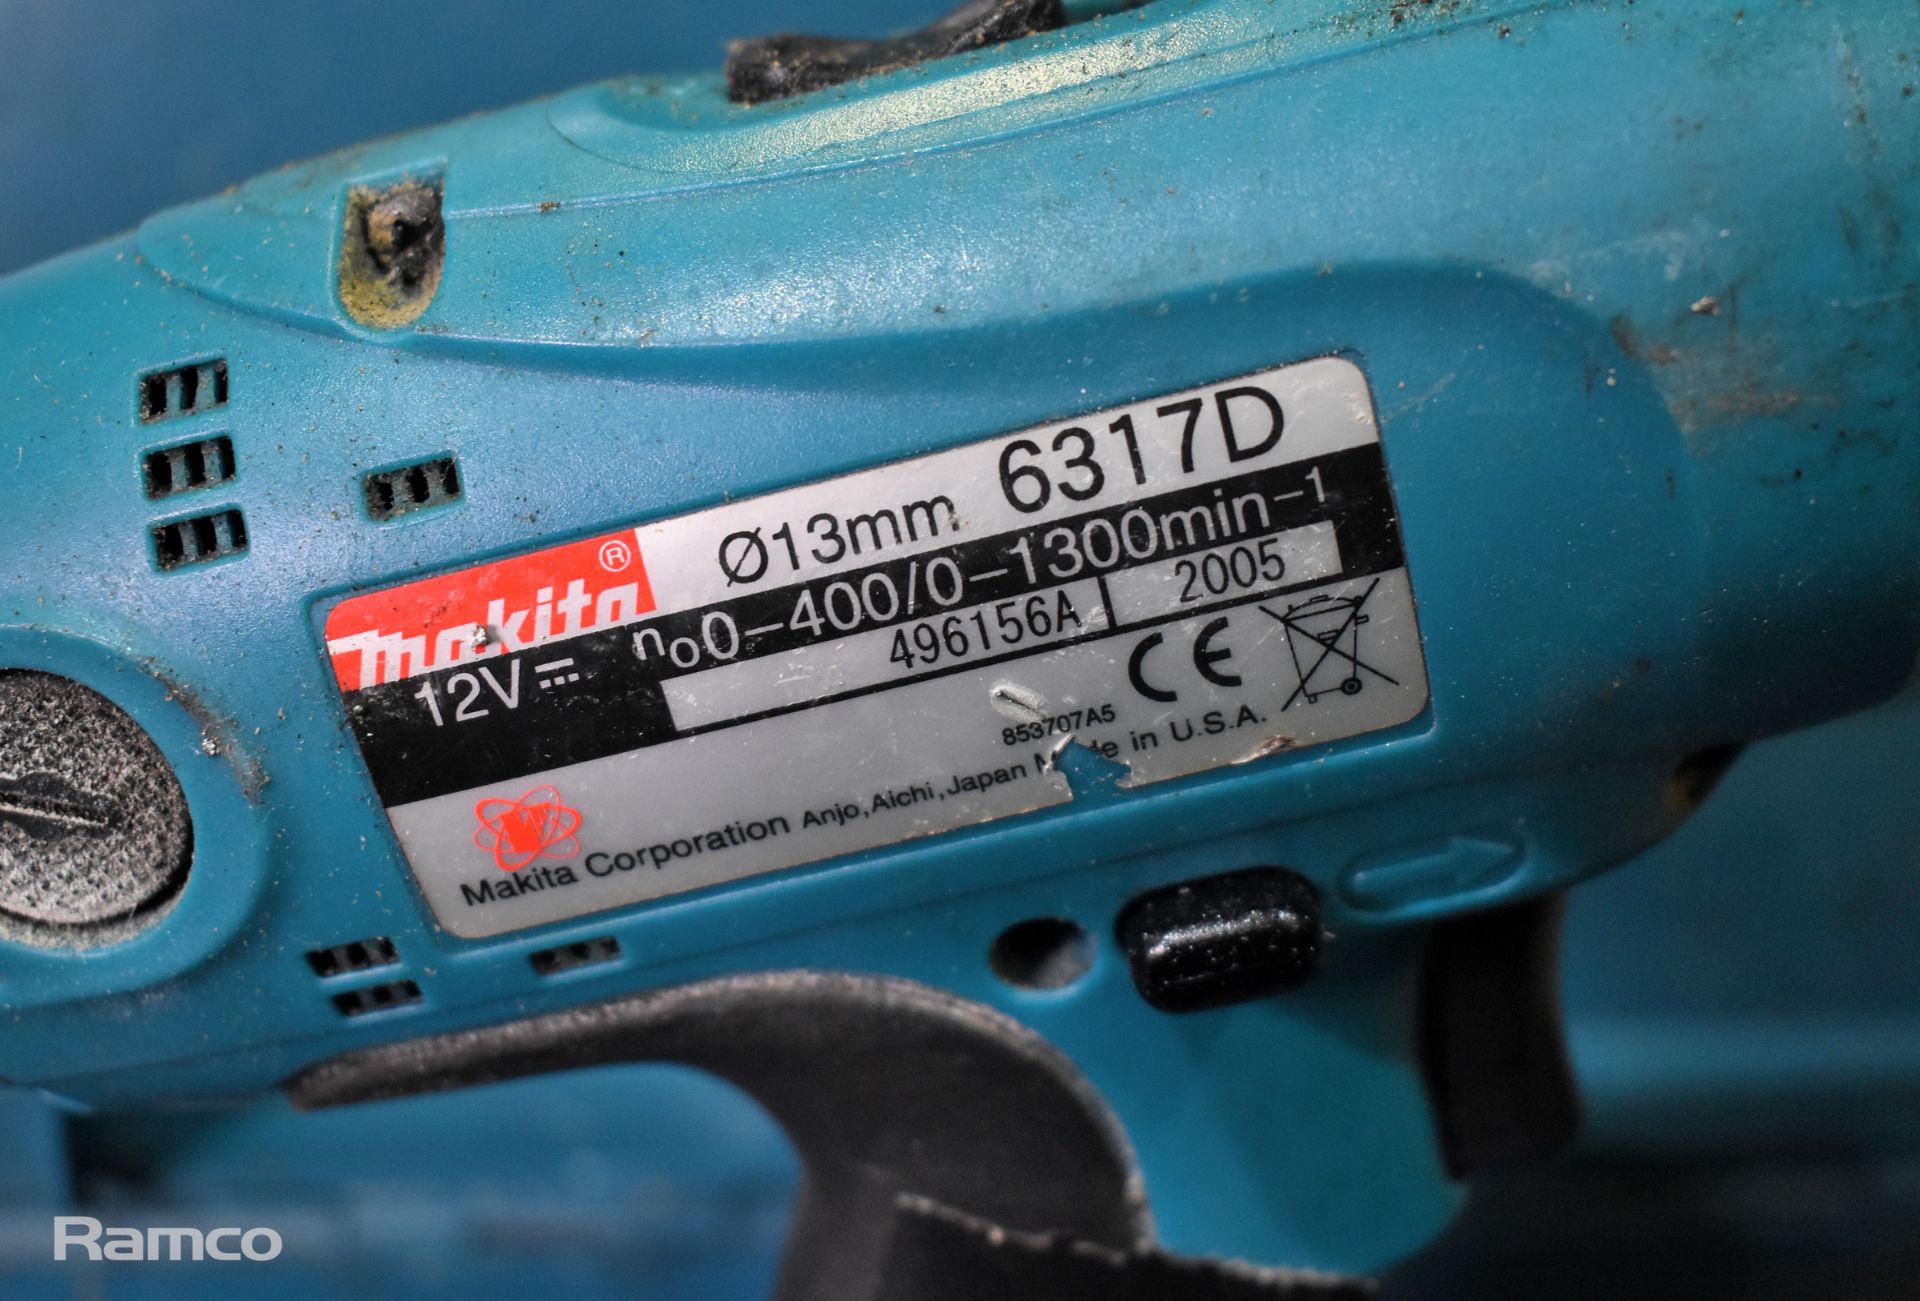 Makita 6317D cordless drill - DC1414F charger - 1x 12V battery - case - Image 4 of 5